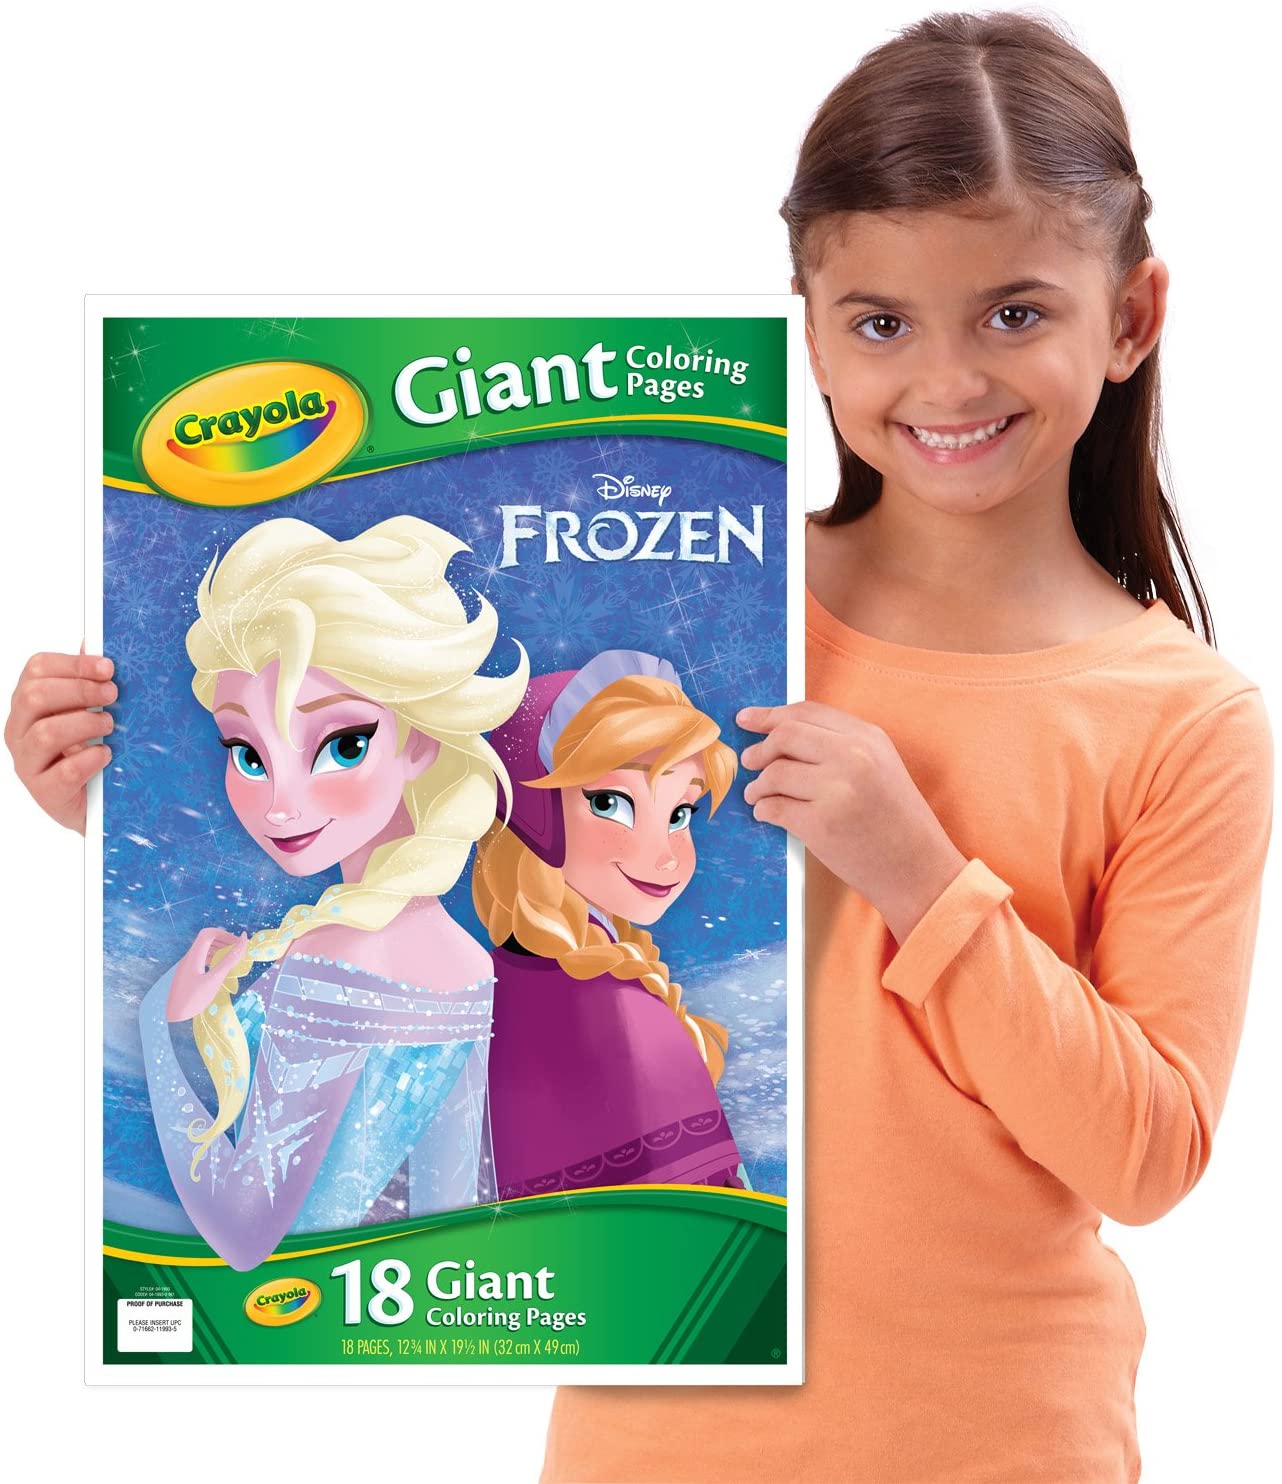 Frozen 2 Giant Coloring Pages